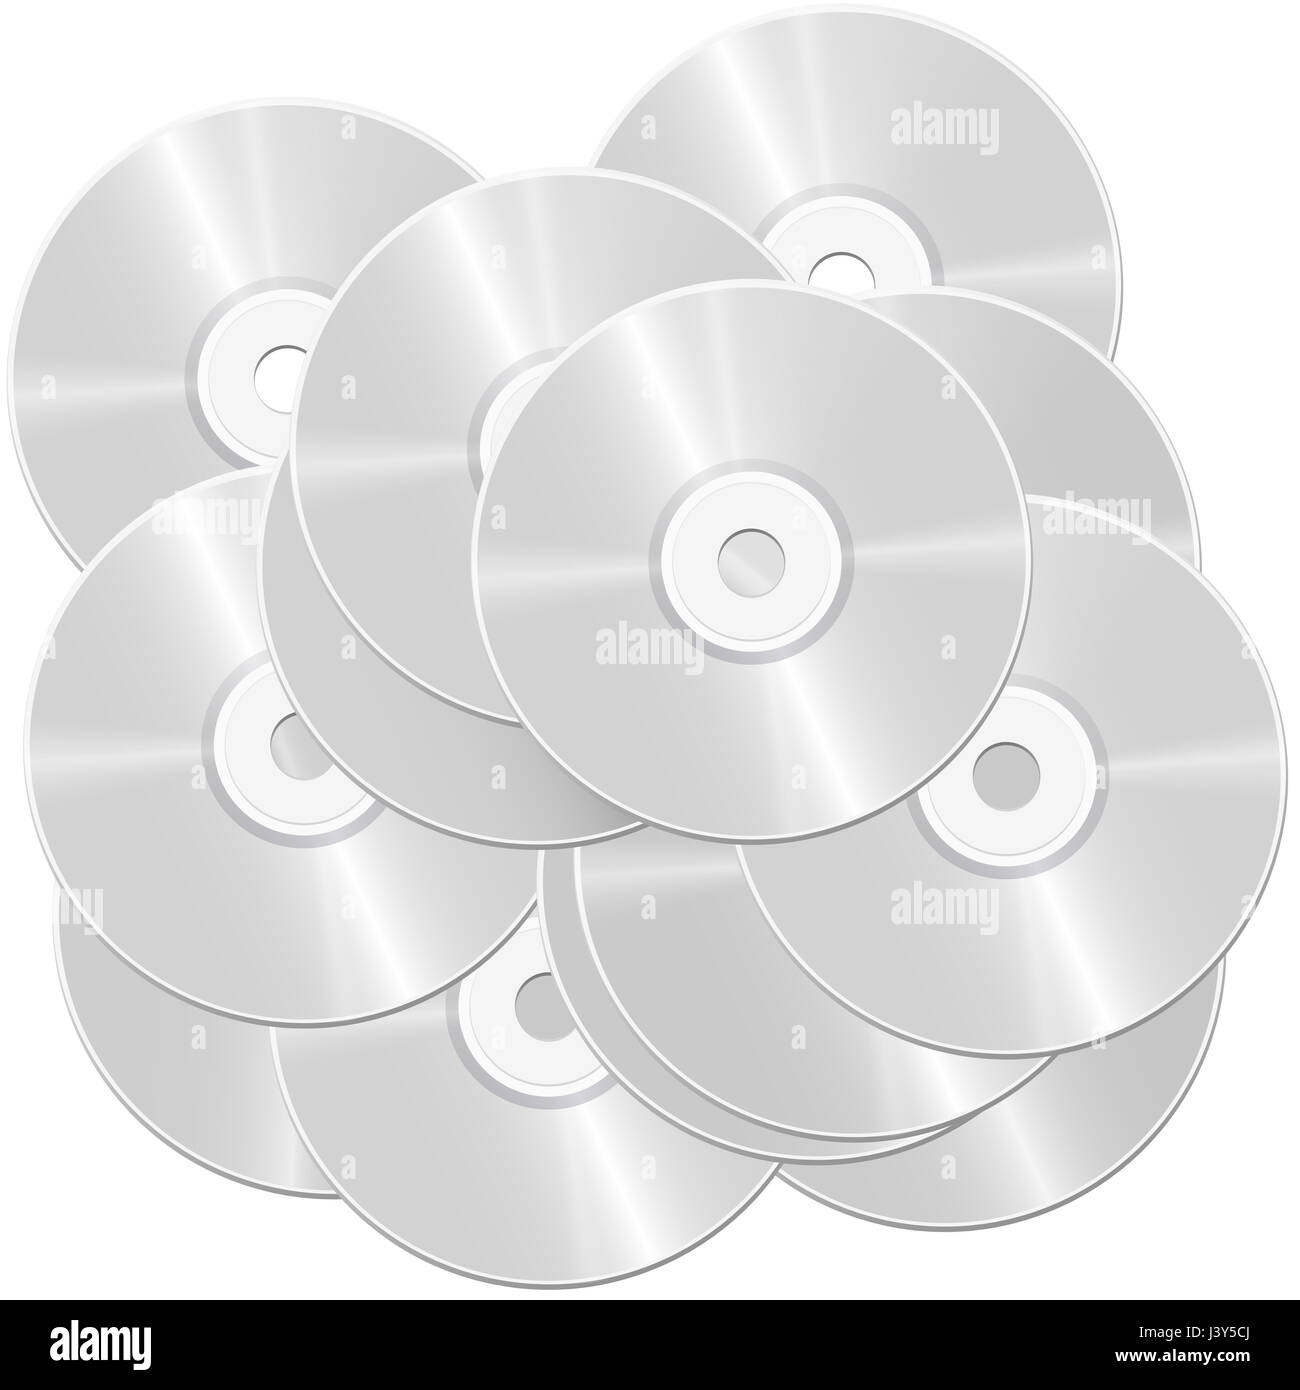 CD pile - heap of compact discs or digital versatile discs - symbolic for large bulk and mass of data and information - illustration Stock Photo